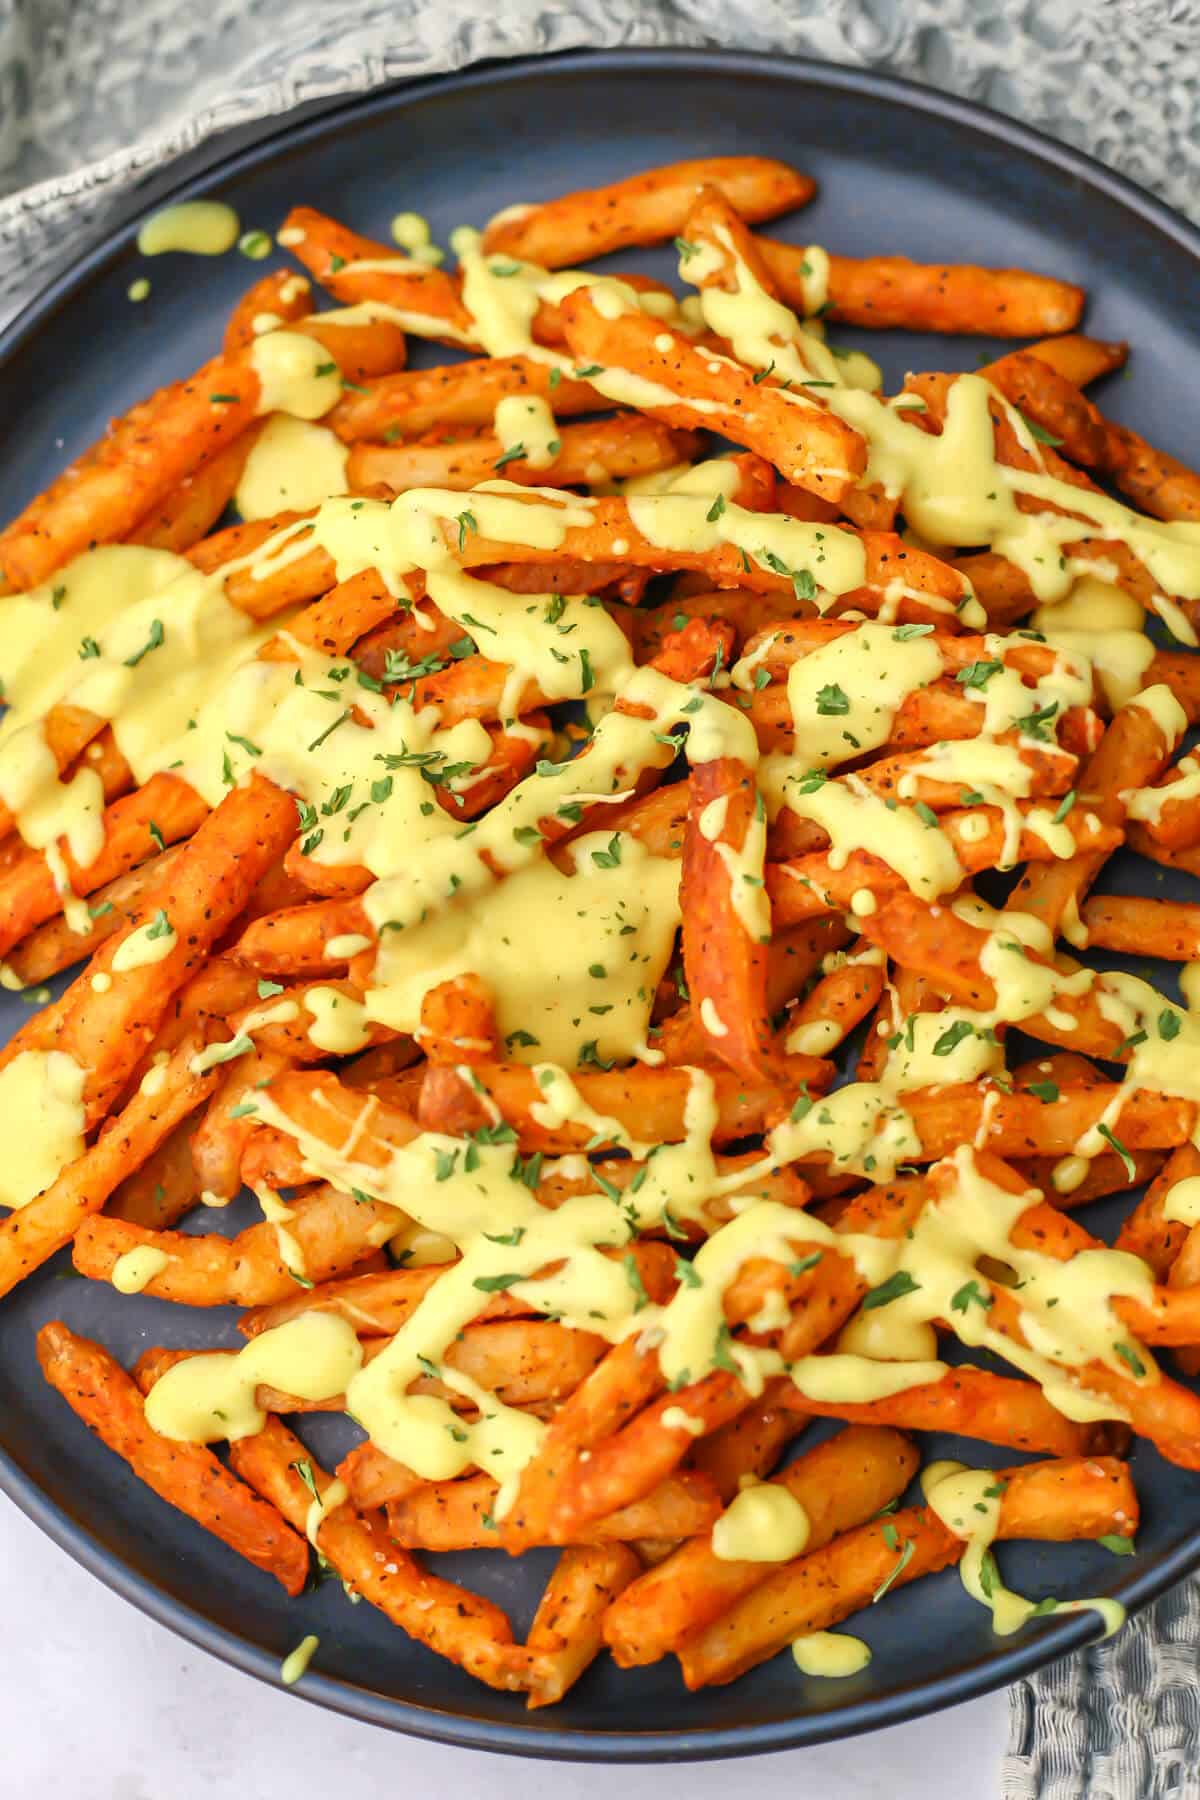 A top view of a plate of French fries drizzled with vegan cheese sauce.